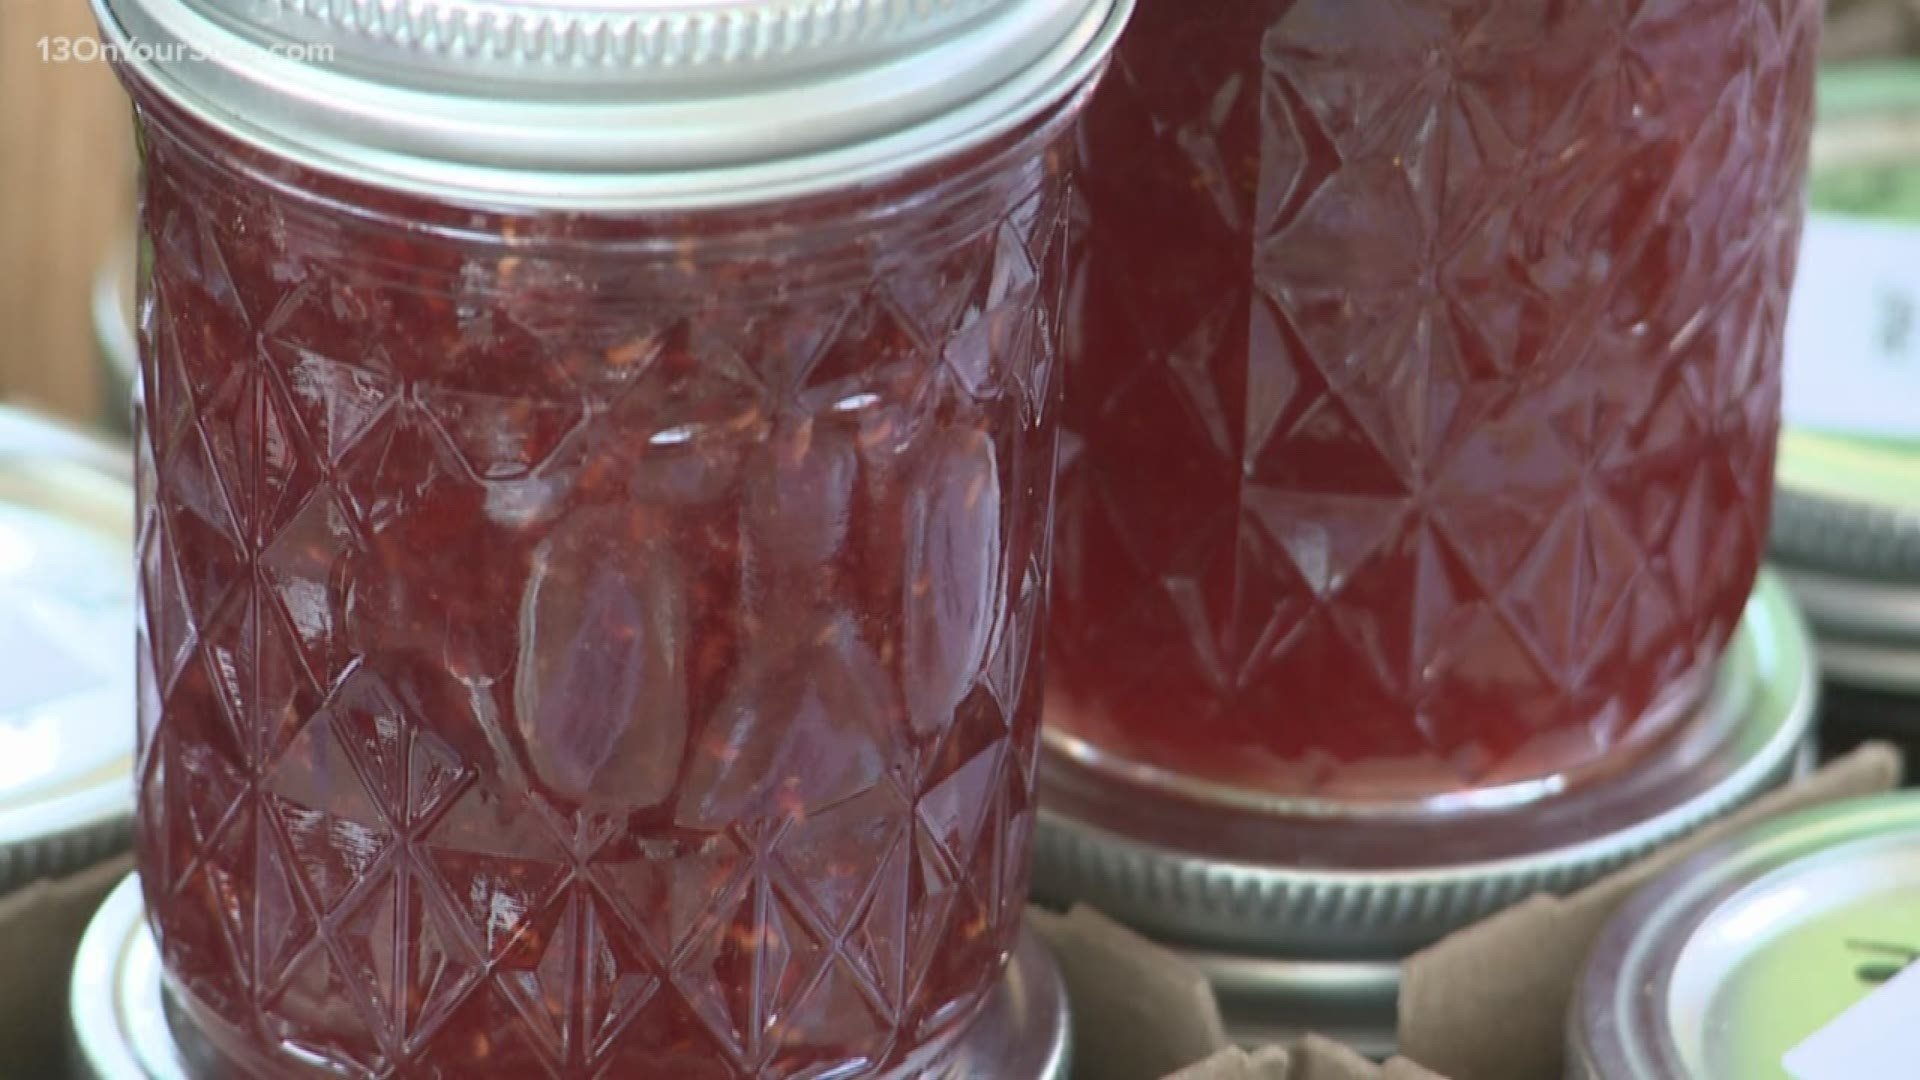 If you're looking for a way to stretch out the flavors of summer, it's easier than you think. 13 On Your Side's Kirk Montgomery took a trip to the Muskegon Farmers Market to learn about canning fresh fruit. He was joined by dietitian Grace DeRocha from Blue Cross Blue Shield of Michigan.